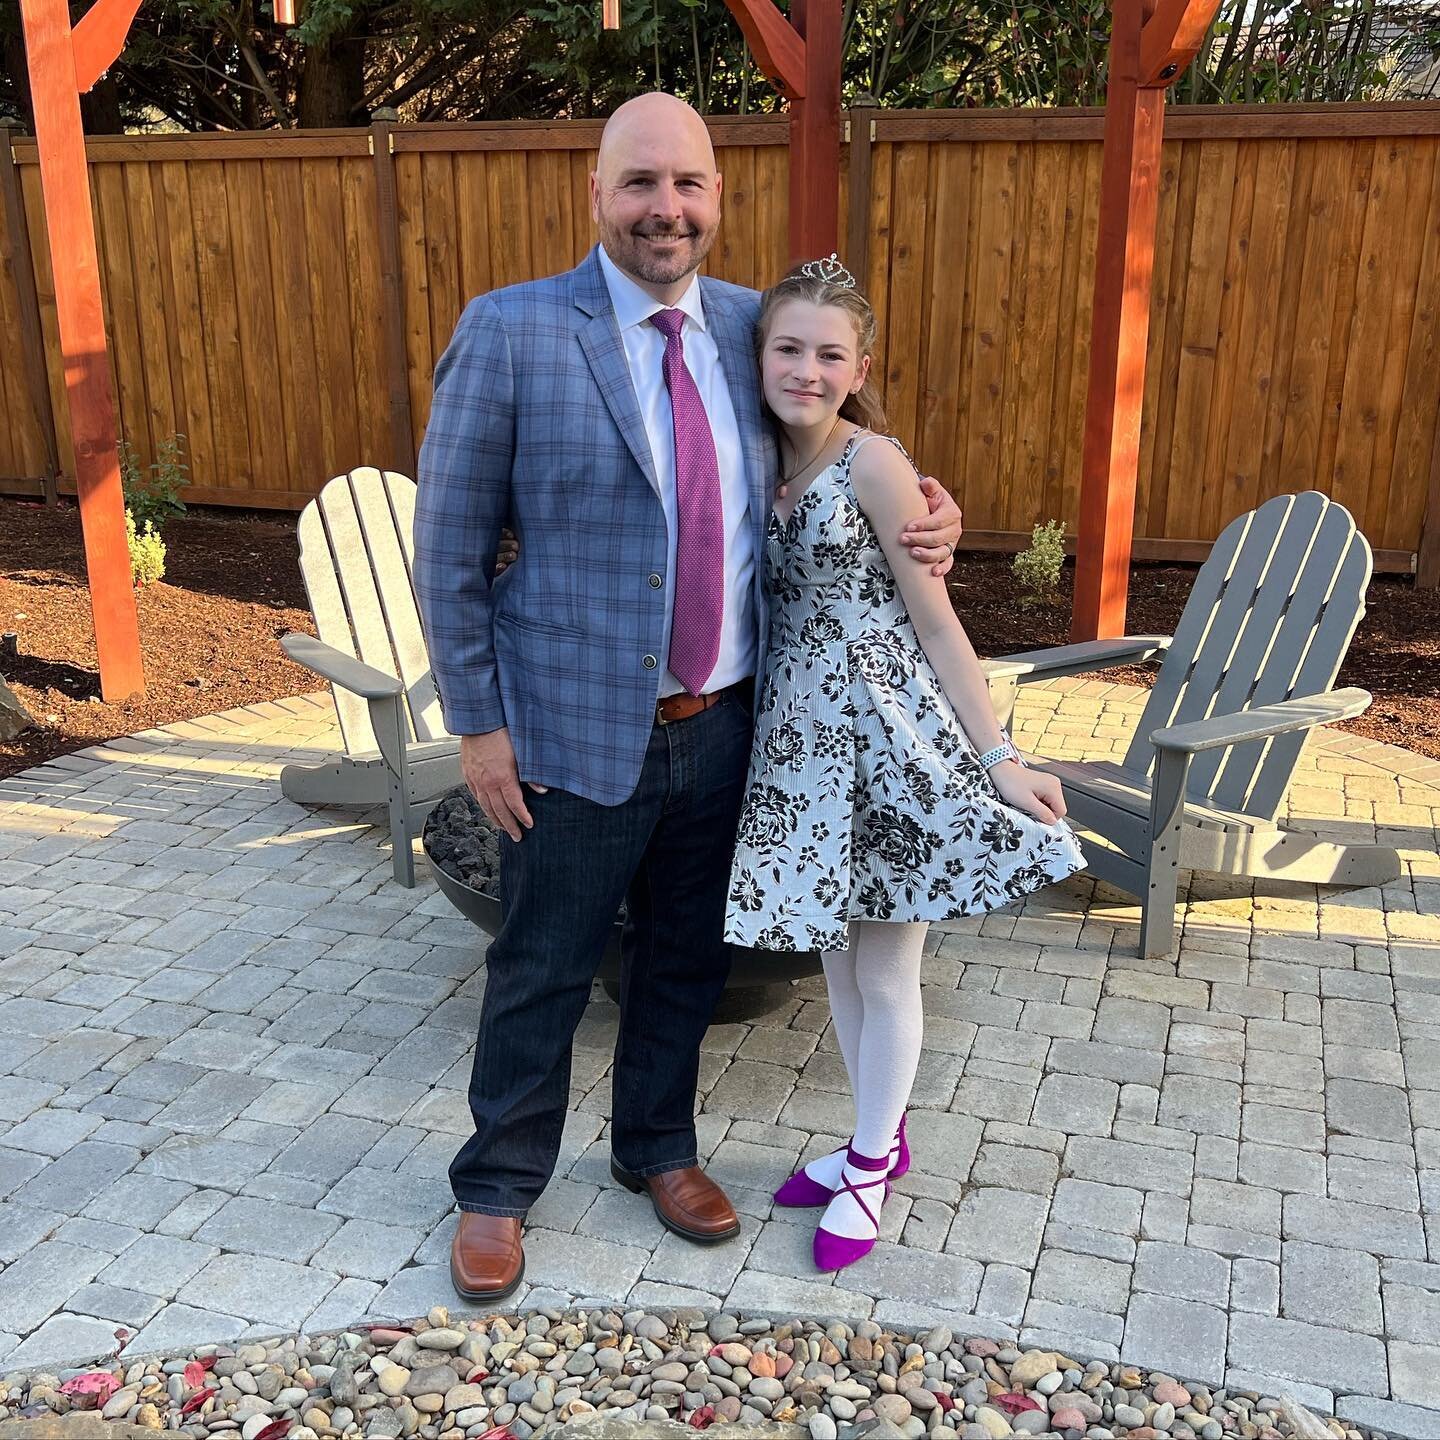 Looking good for their annual Daddy Daughter Dance. They clean up well! 🎉💃🕺